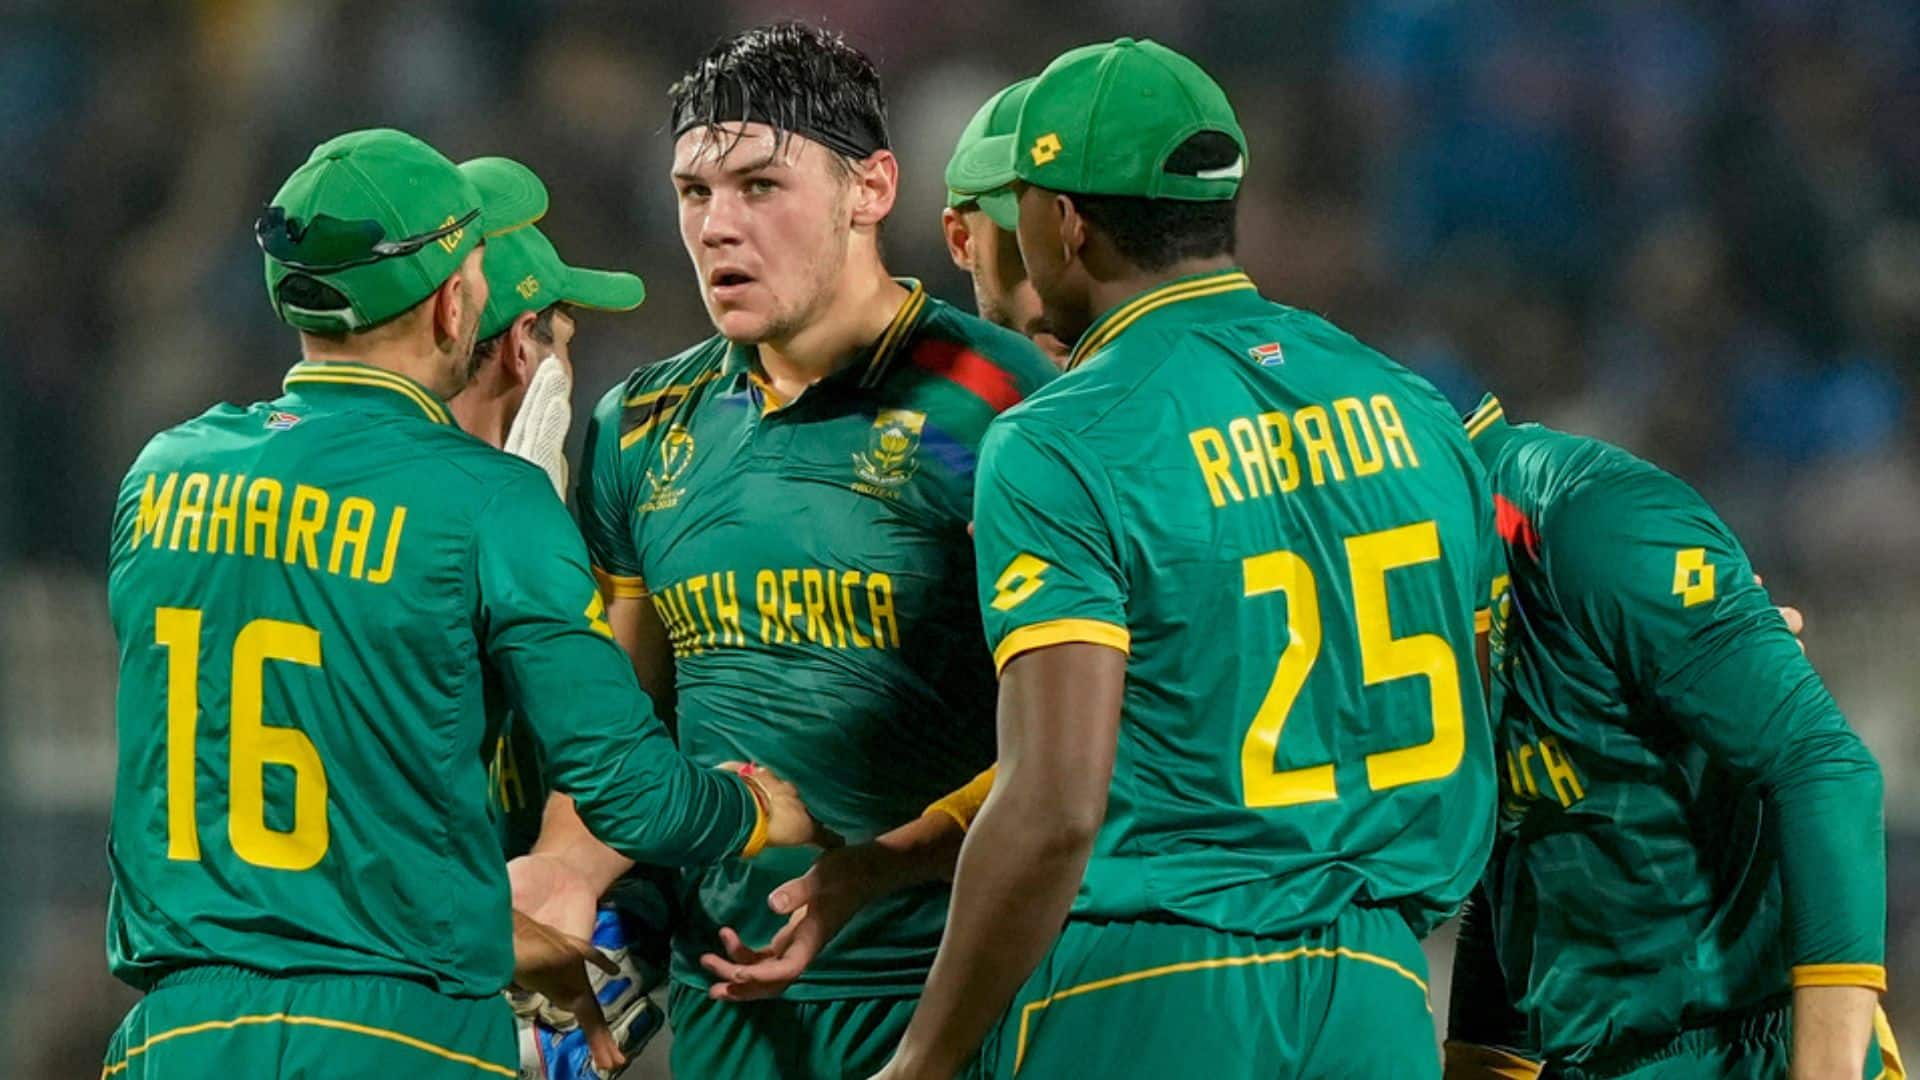 Tristan Stubbs And Donovan Ferreira Included, As Aiden Markram led-South Africa Announces T20I Squad